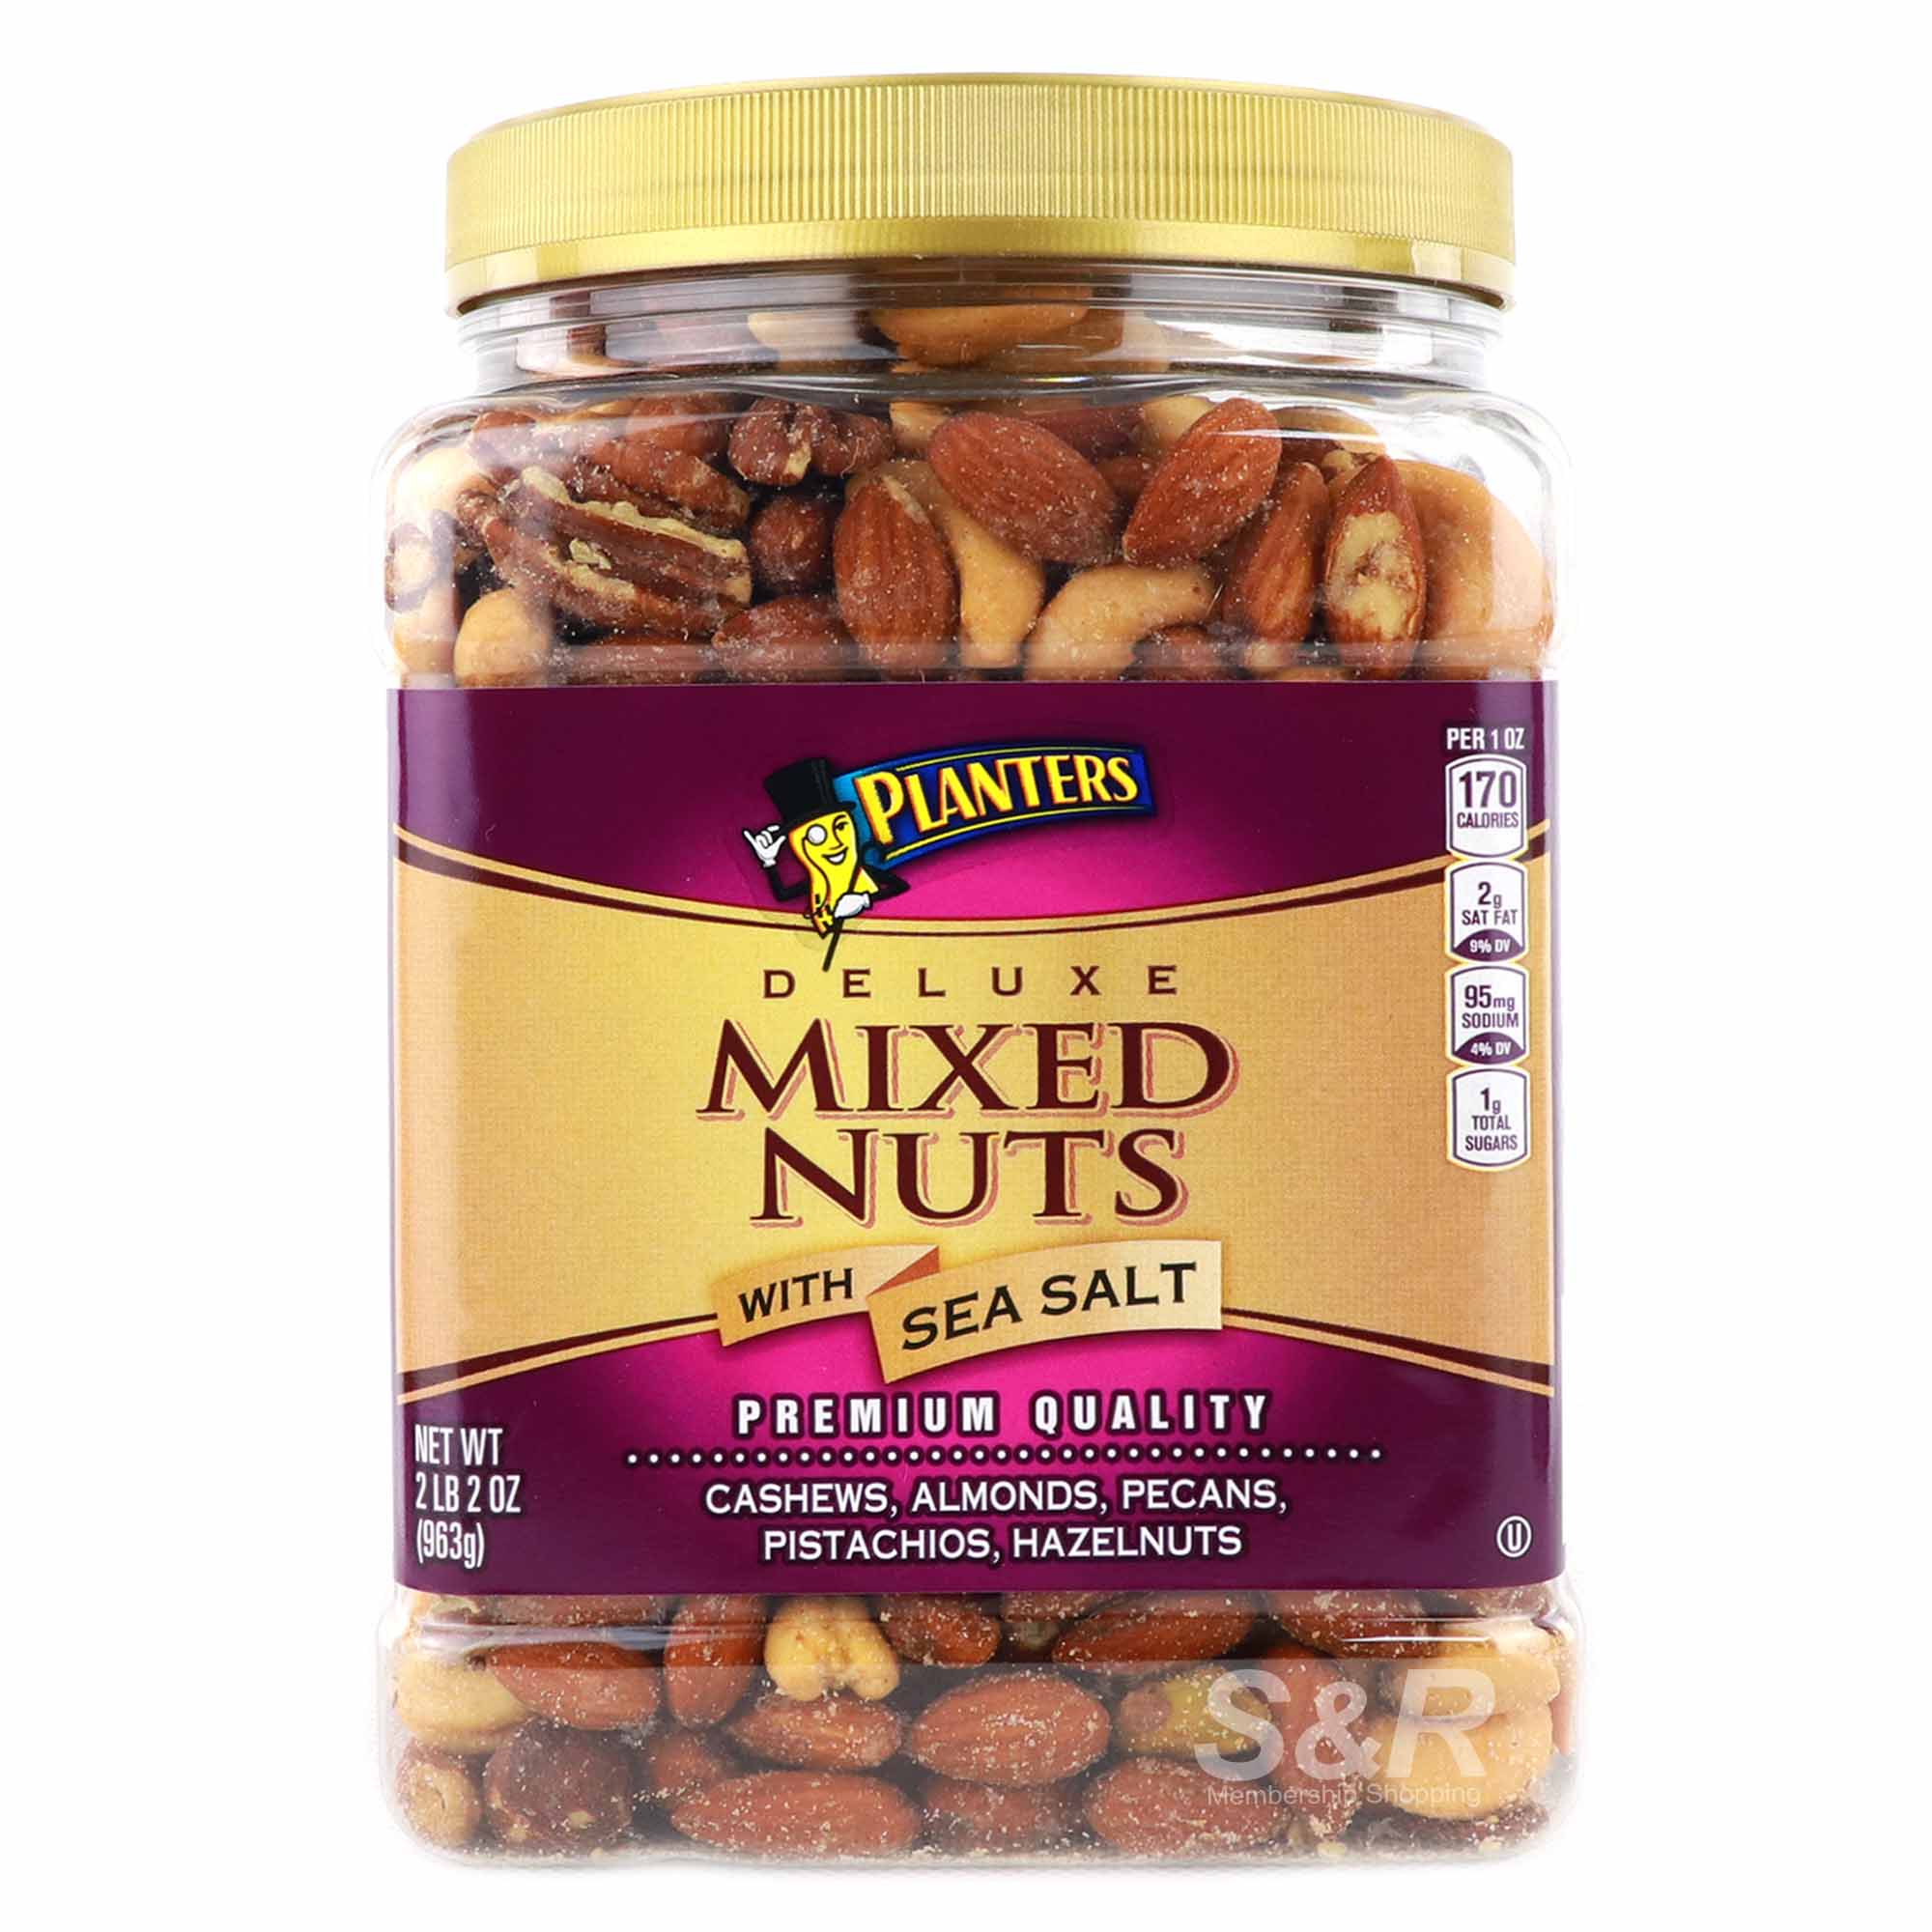 Planters Deluxe Mixed Nuts with Sea Salt 963g